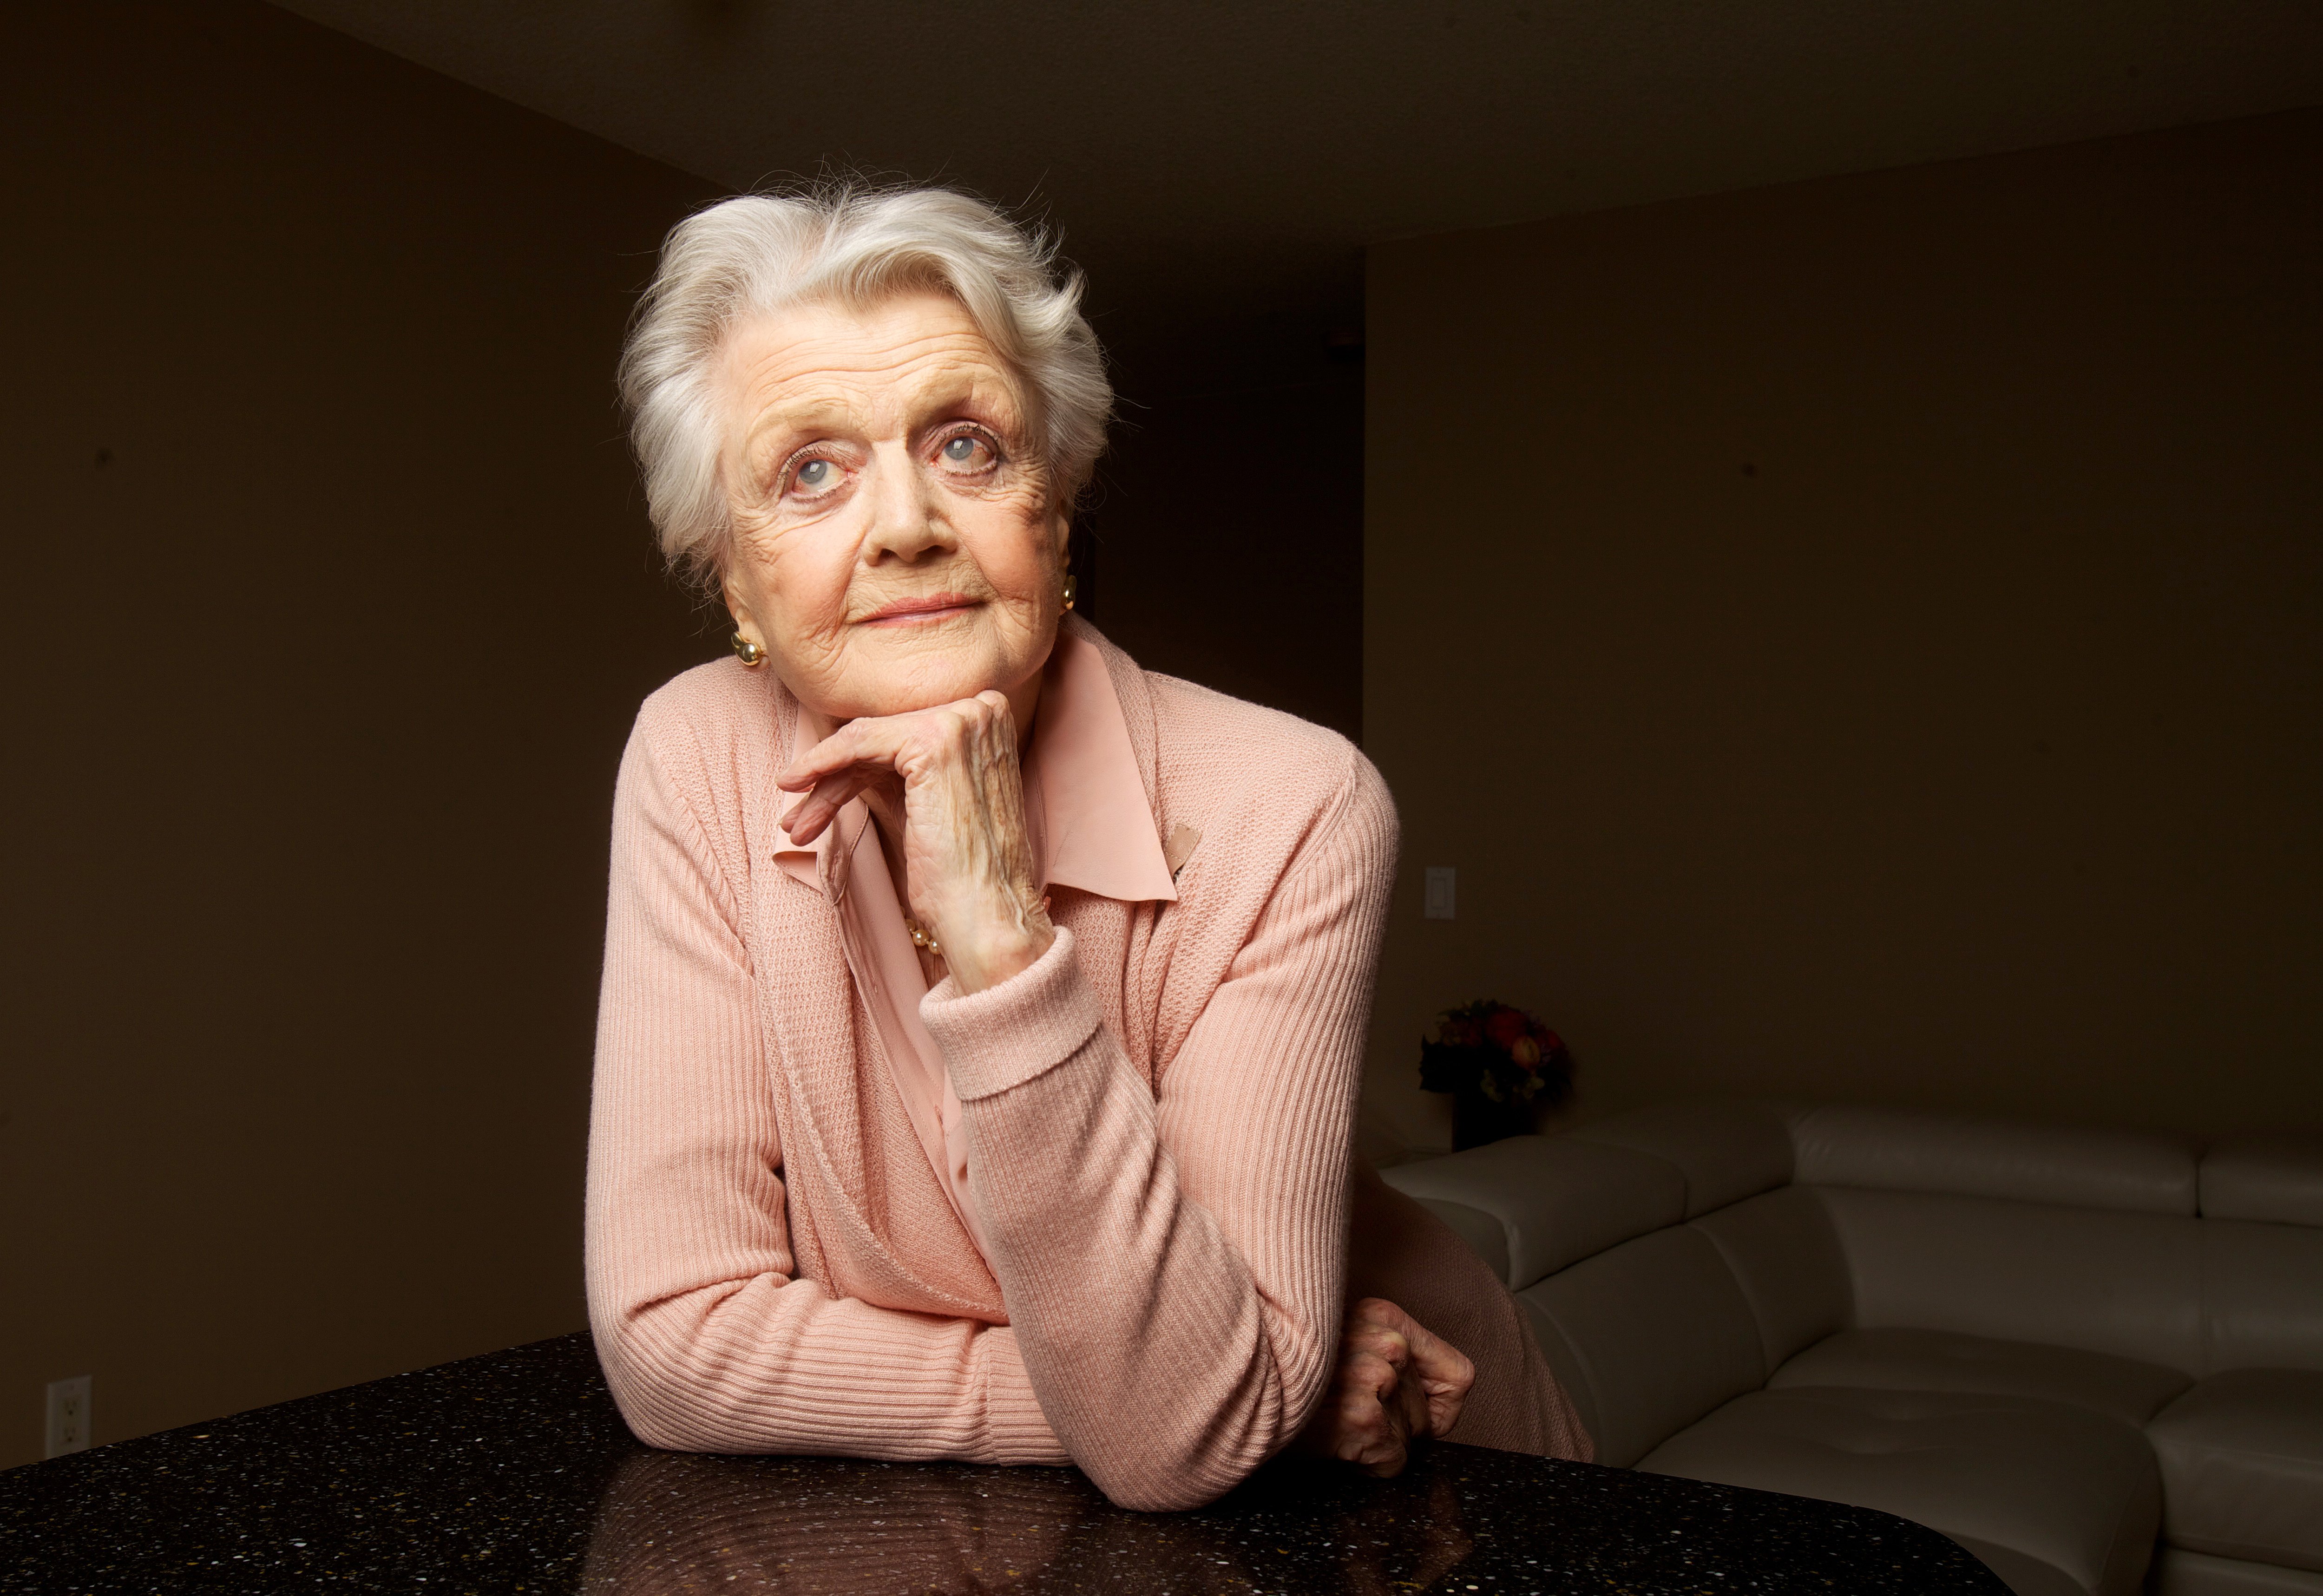 Actress Angela Lansbury poses for a photo at the Rosedale Residencies in Toronto on Thursday February 5th, 2015. | Source: Getty Images